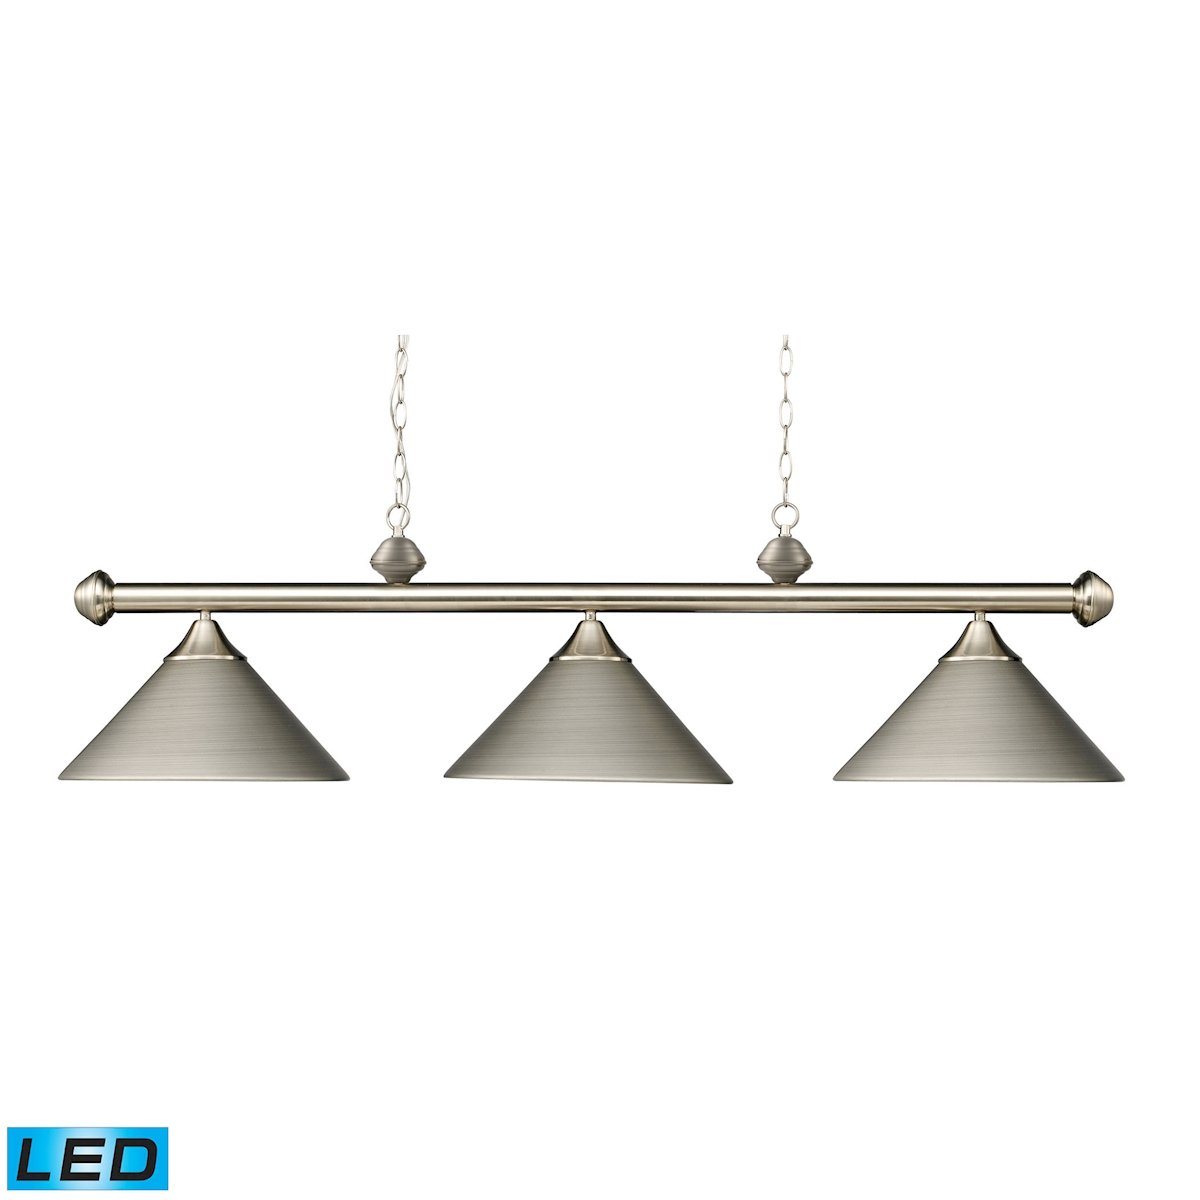 Casual Traditions 3 Light LED Billiard In Satin Nickel With Matching Metal Shades Ceiling Elk Lighting 